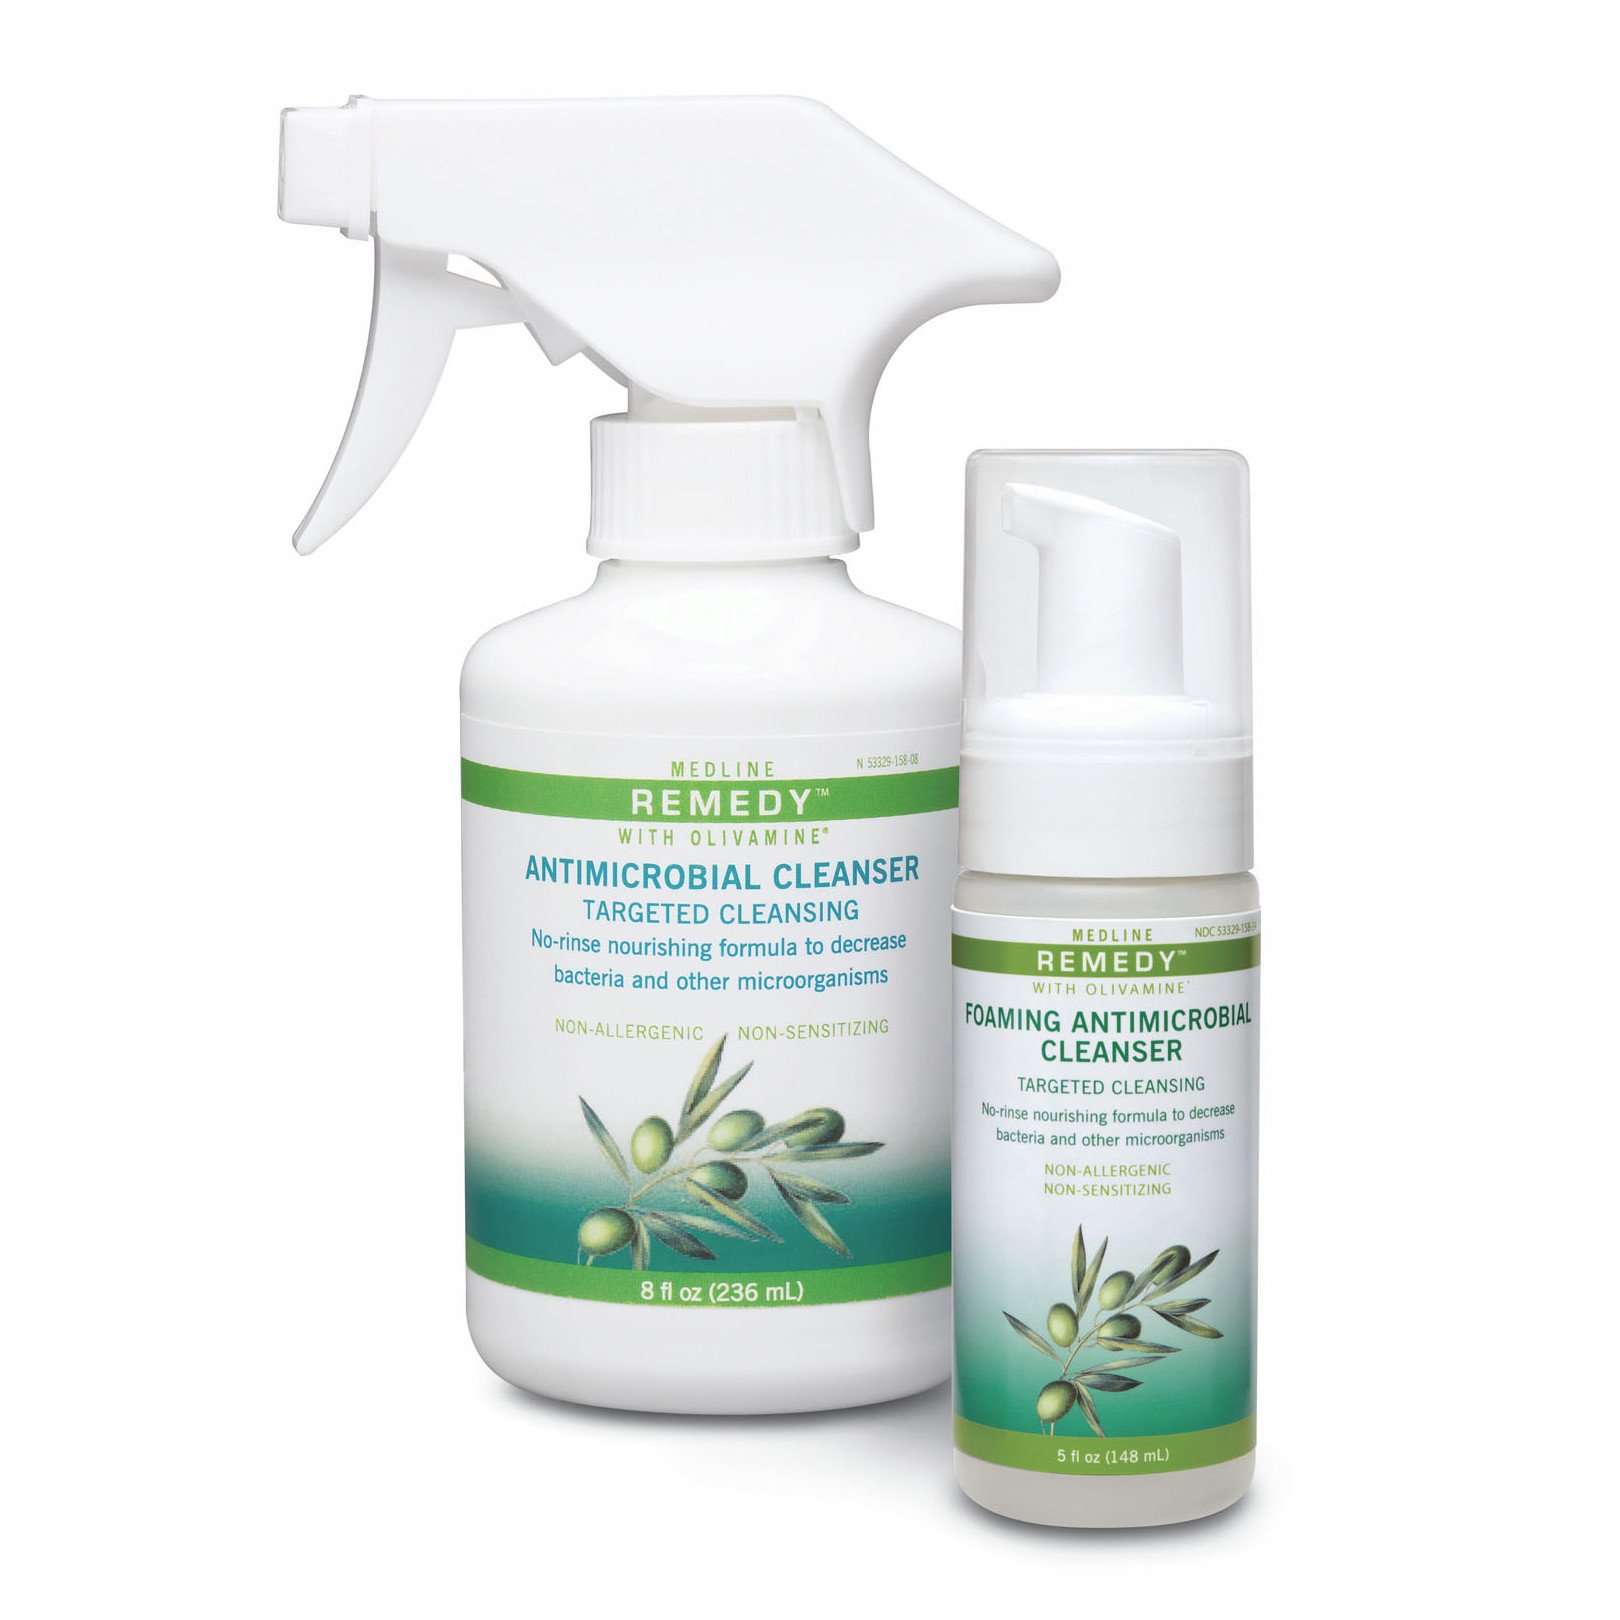 Remedy Antimicrobial Cleanser